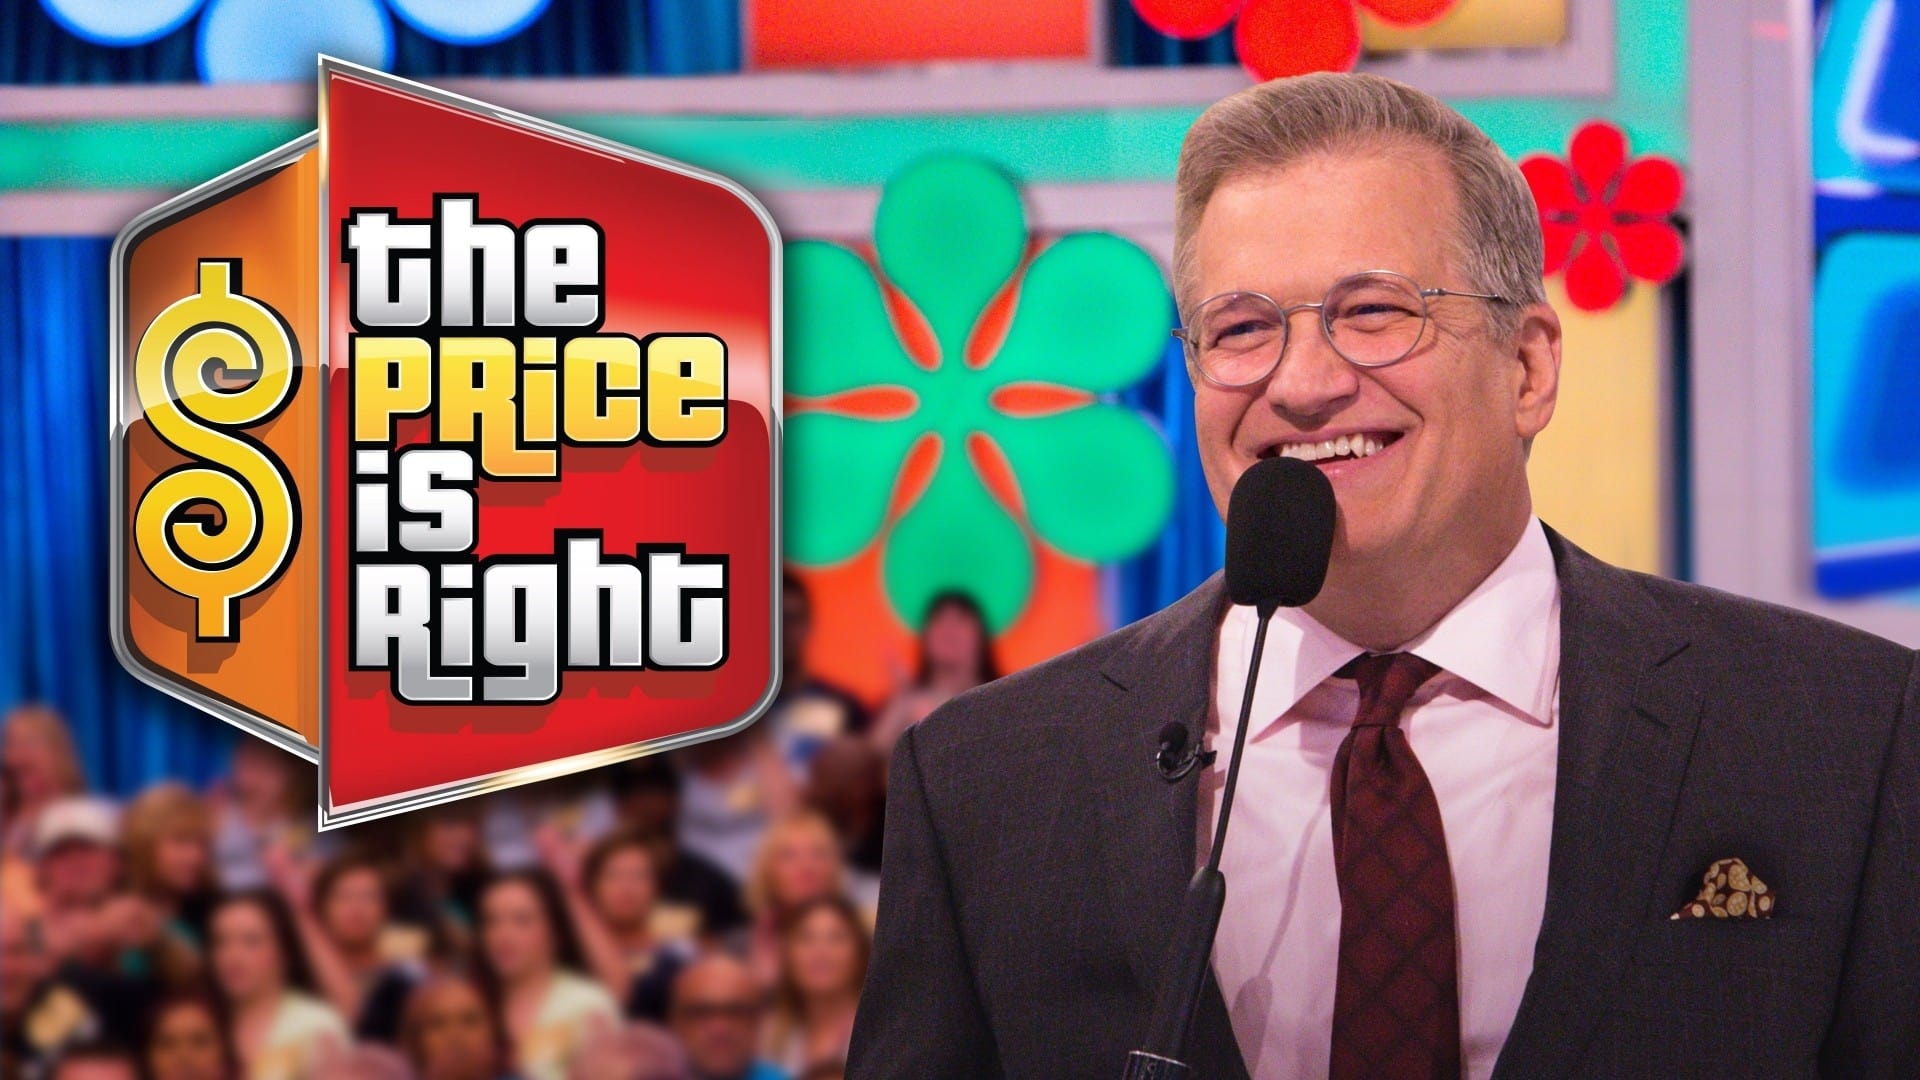 The Price Is Right - Season 2 Episode 124 : The Price Is Right Season 2 Episode 124